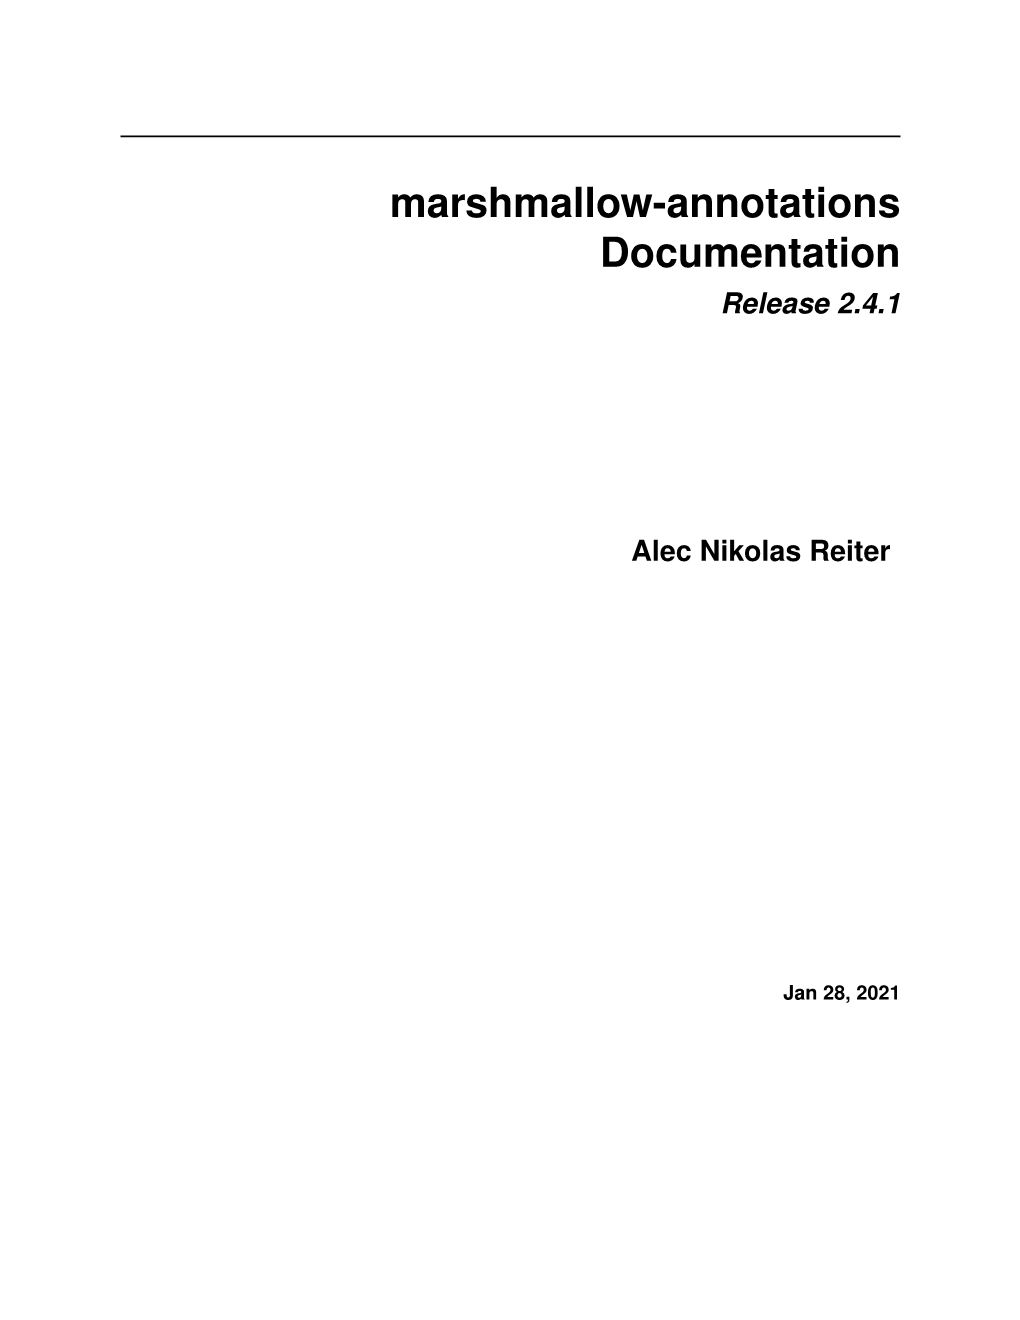 Marshmallow-Annotations Documentation Release 2.4.1